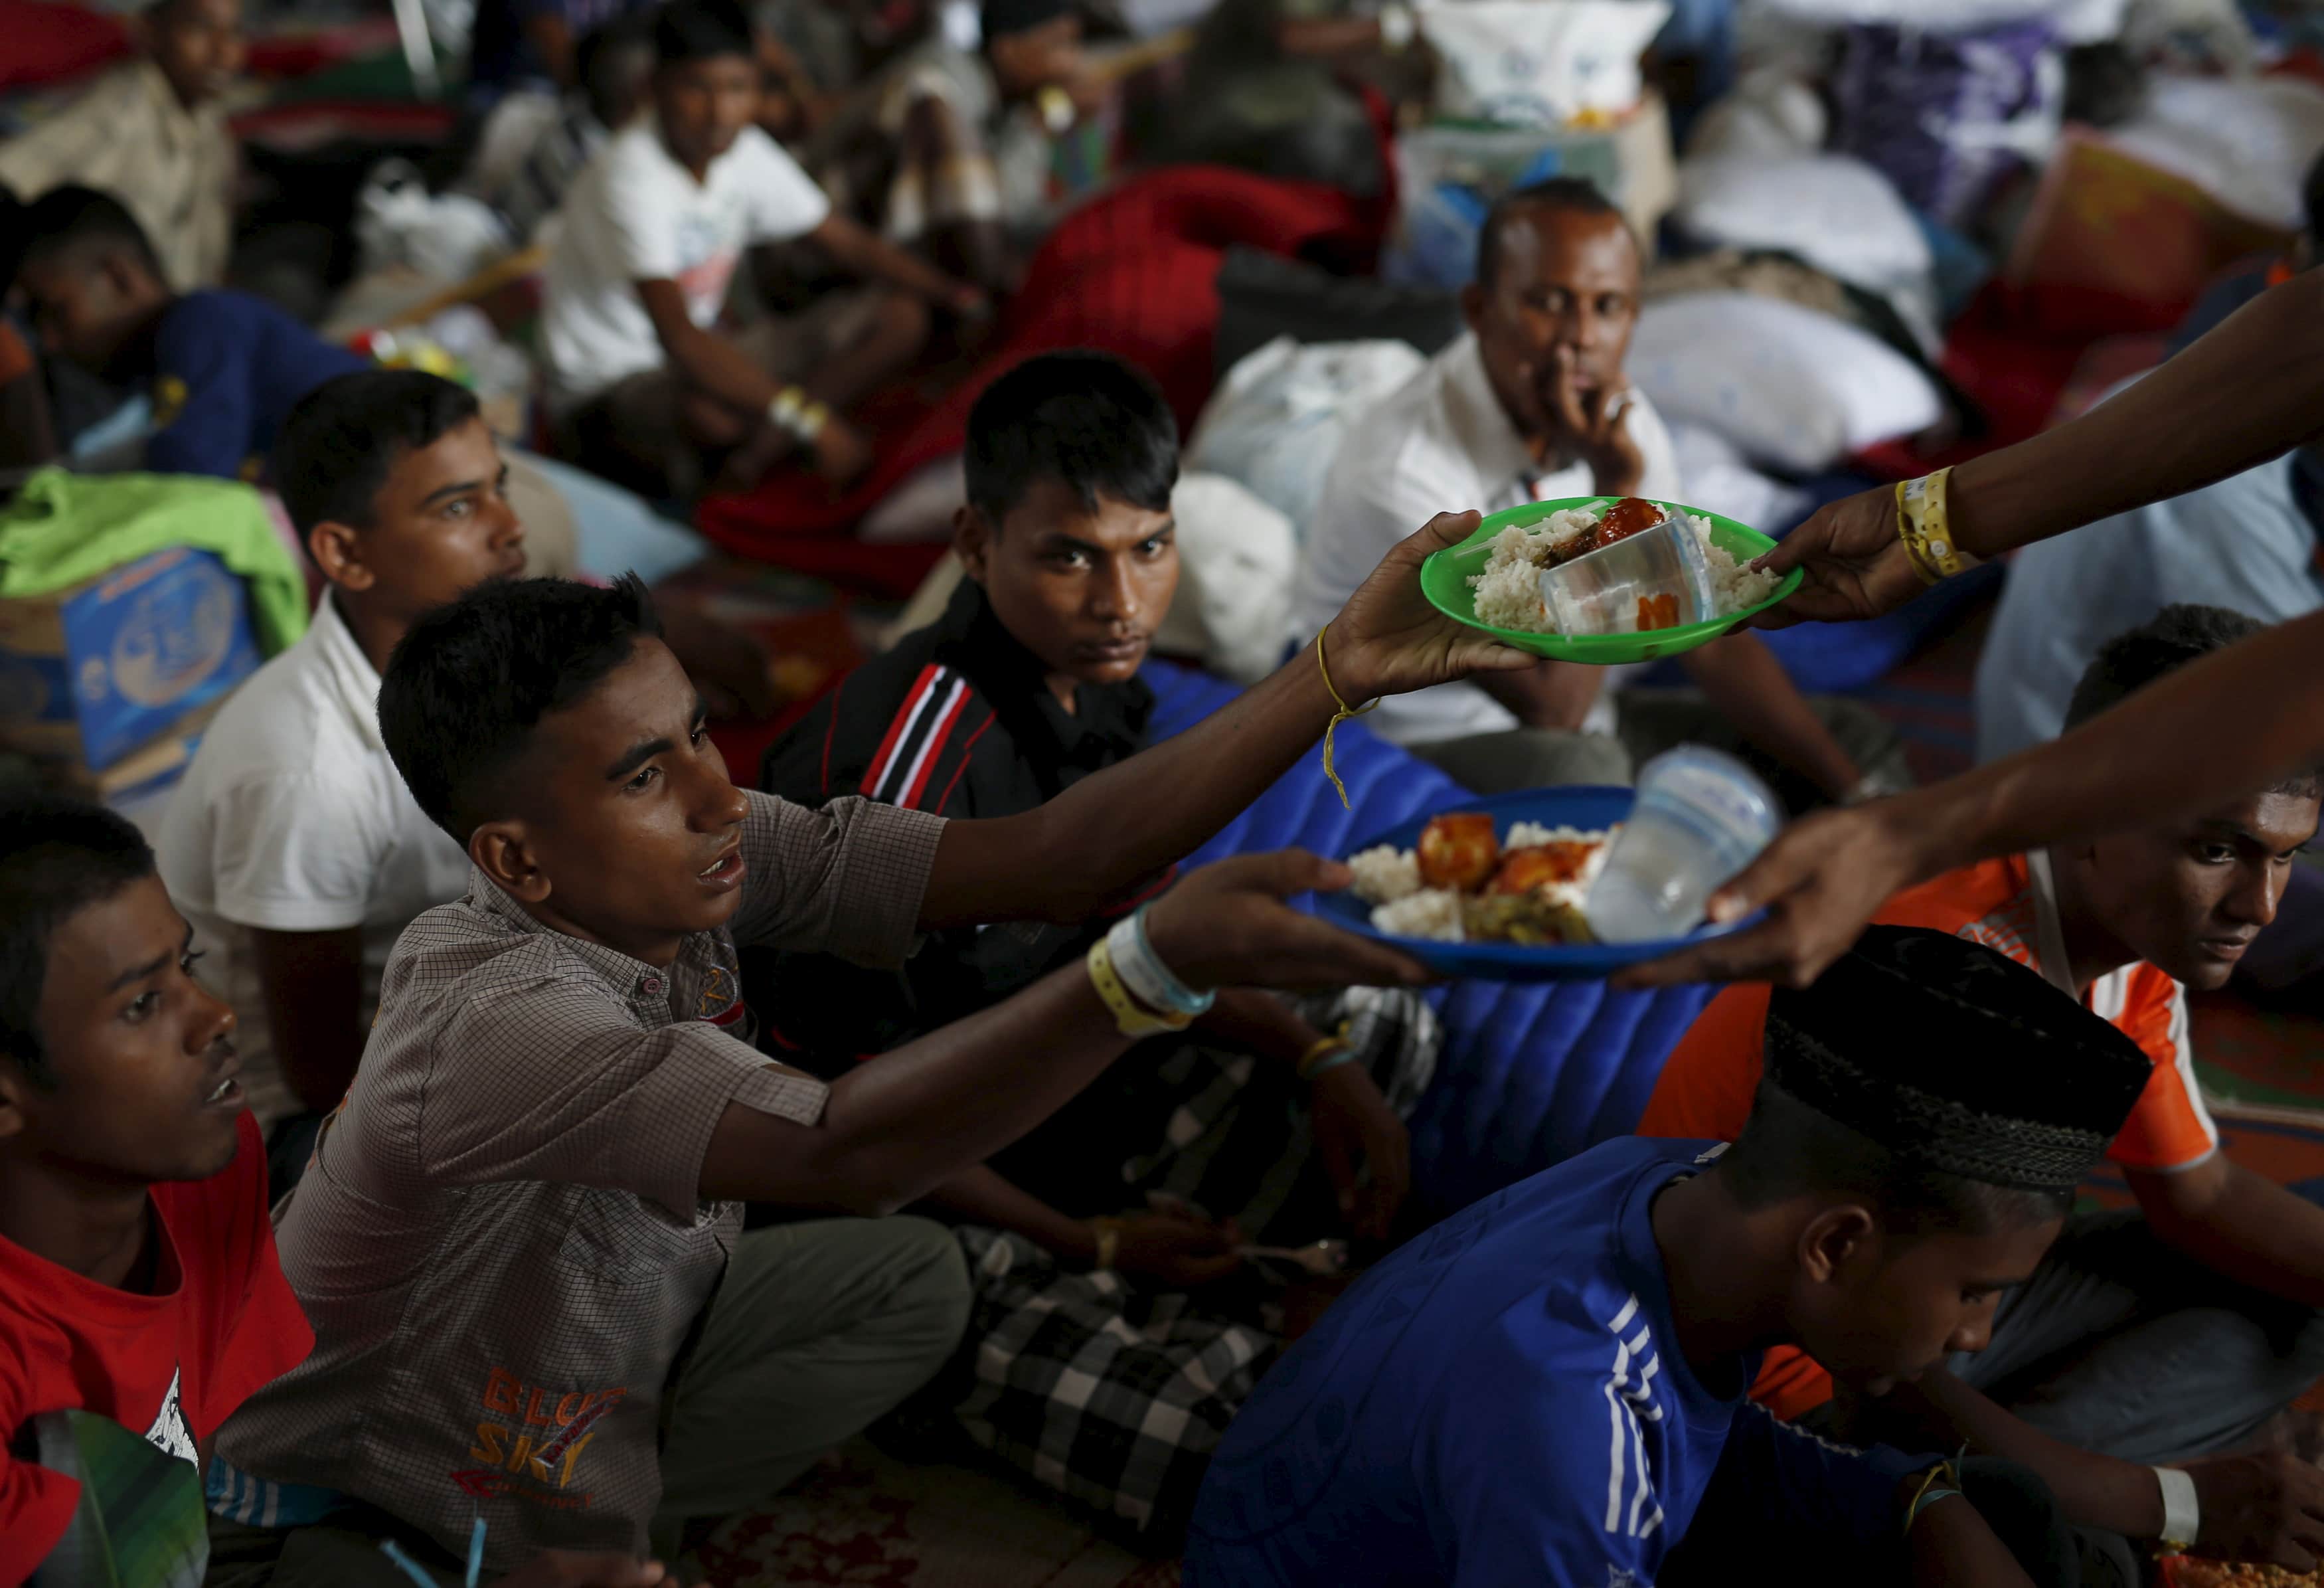 Rohingya migrants who arrived recently by boat receive their breakfast at a temporary shelter in Kuala Langsa, in Indonesia's Aceh Province, 25 May 2015, REUTERS/Darren Whiteside